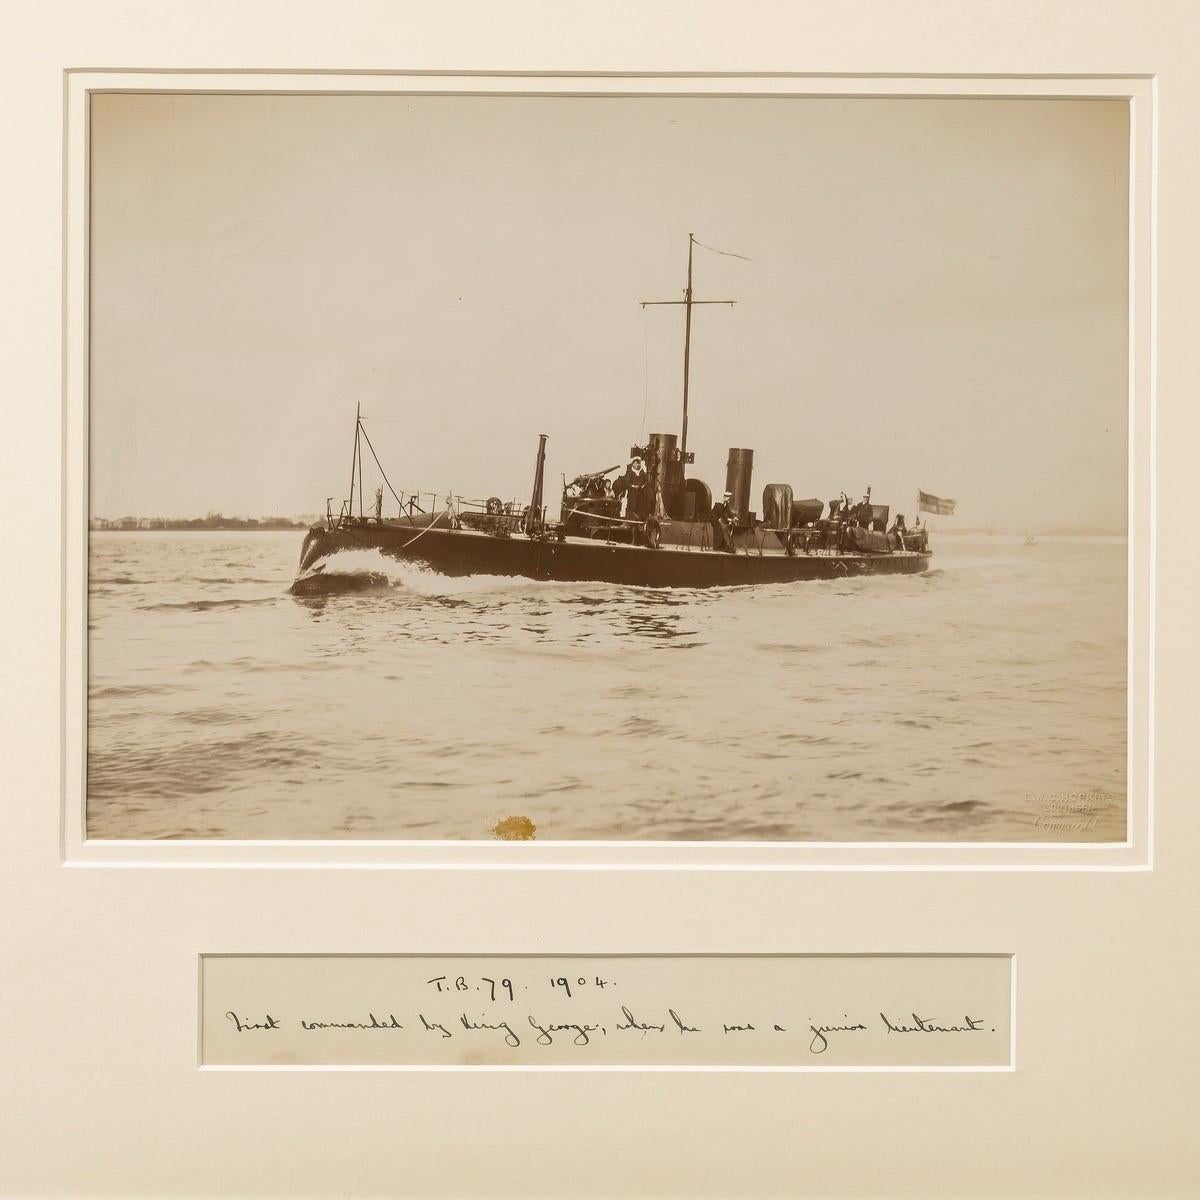 A rare framed albumen photograph of the Royal Navy Torpedo boat no 79. Inscribed on card as being commanded by the Future King George V.